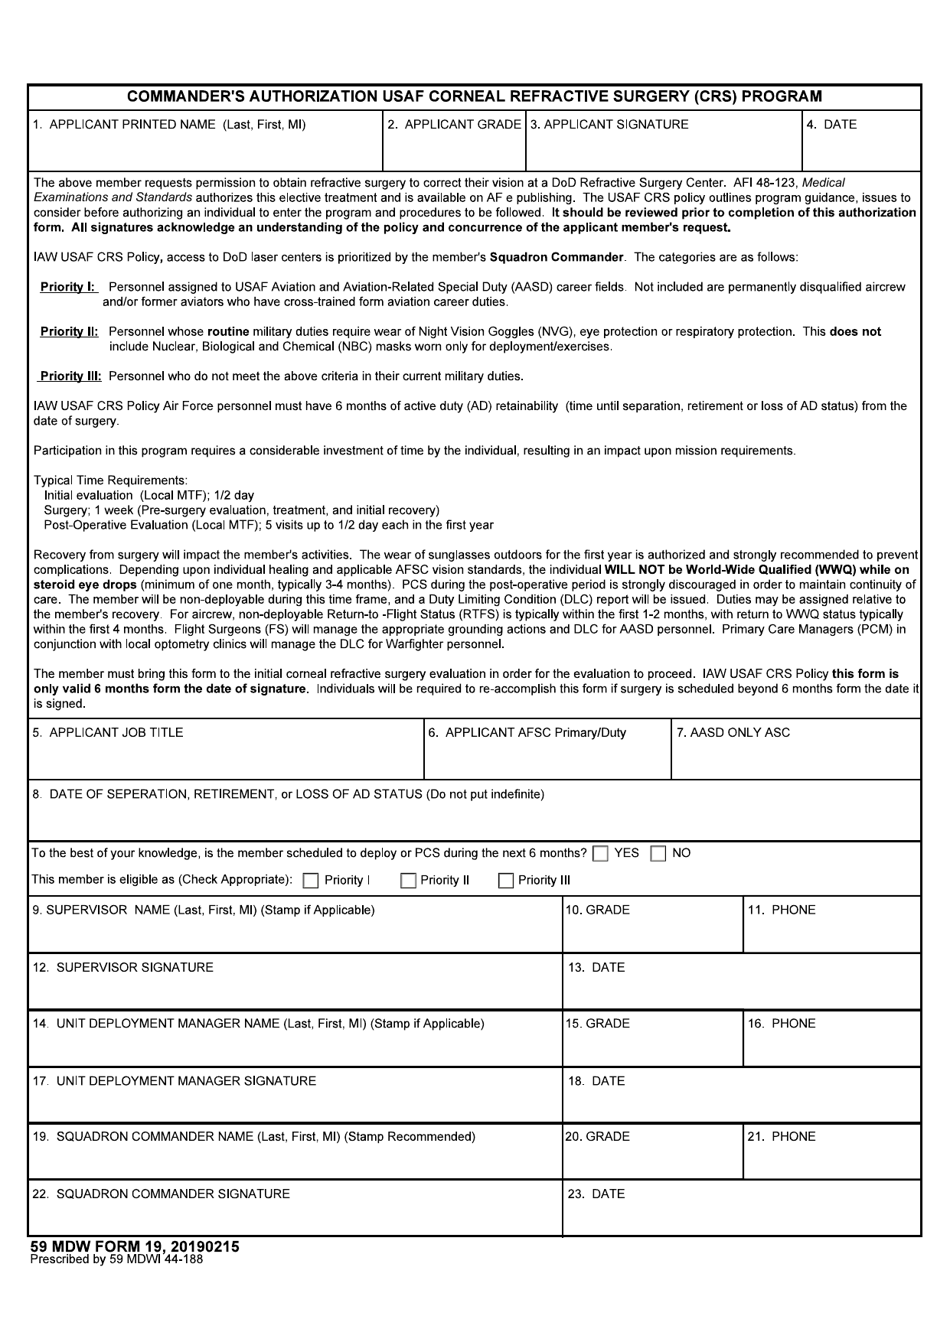 59 MDW Form 19 Commanders Authroization USAF Corneal Refractive (Crs) Program, Page 1